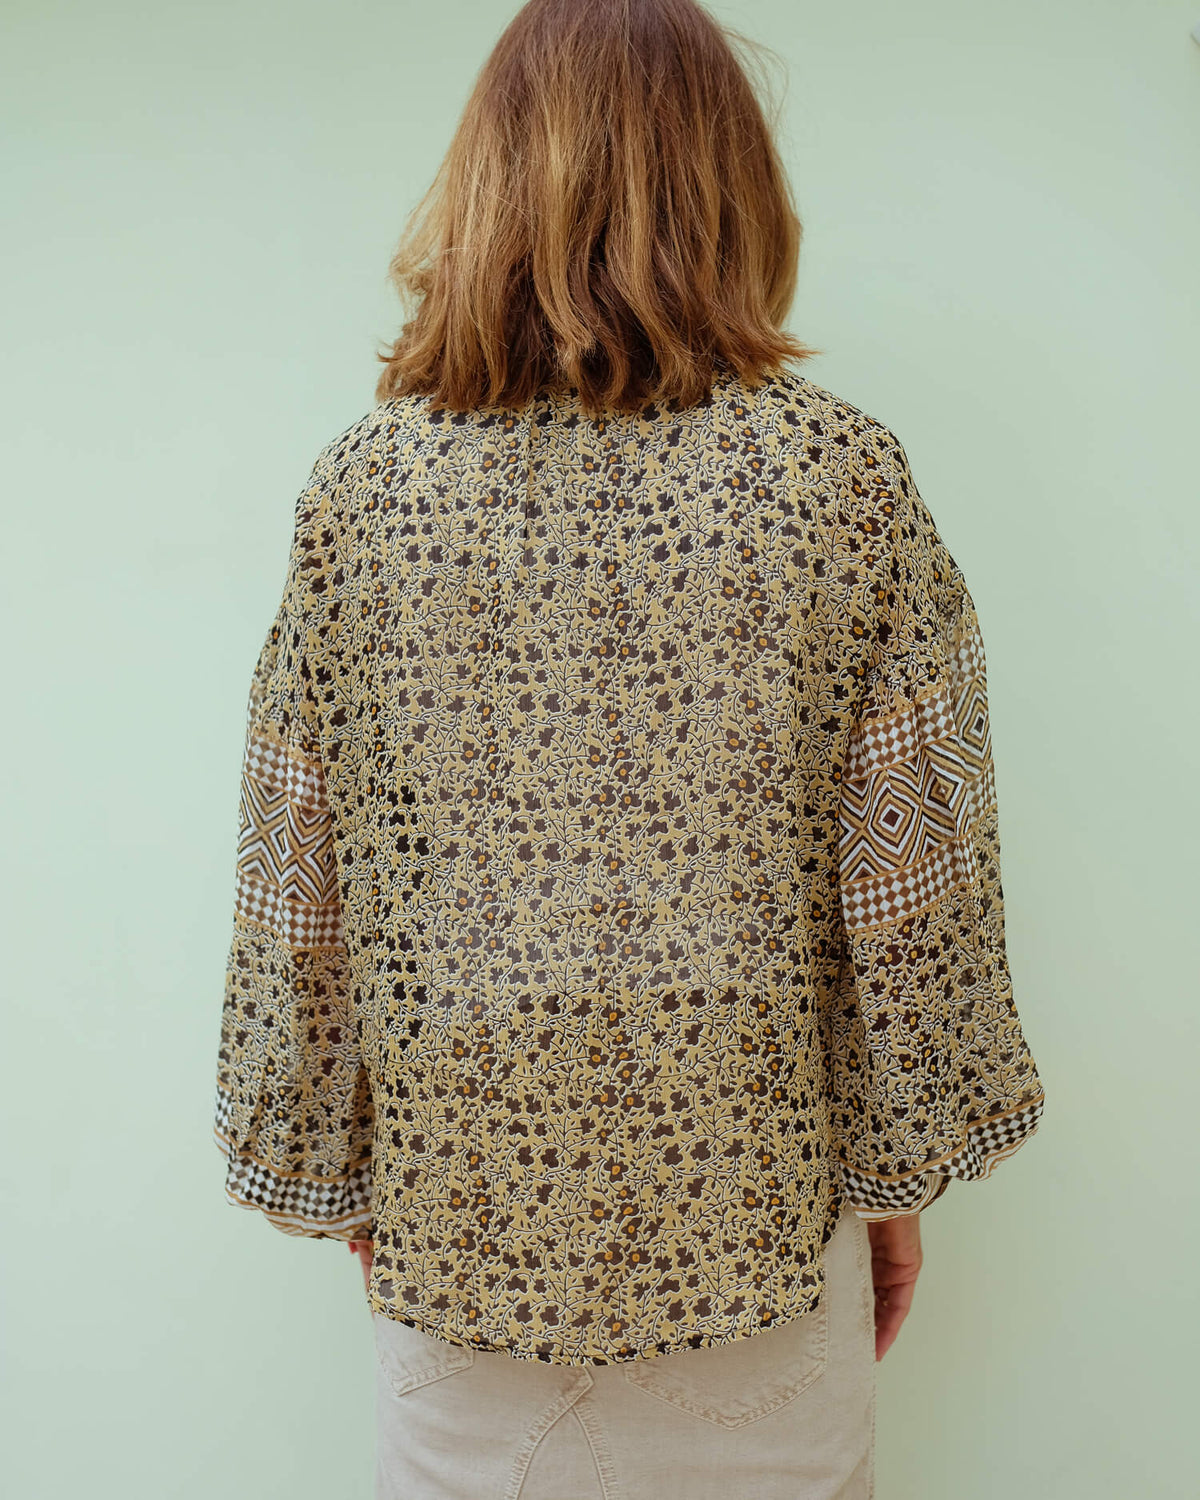 M Mission blouse in sienna